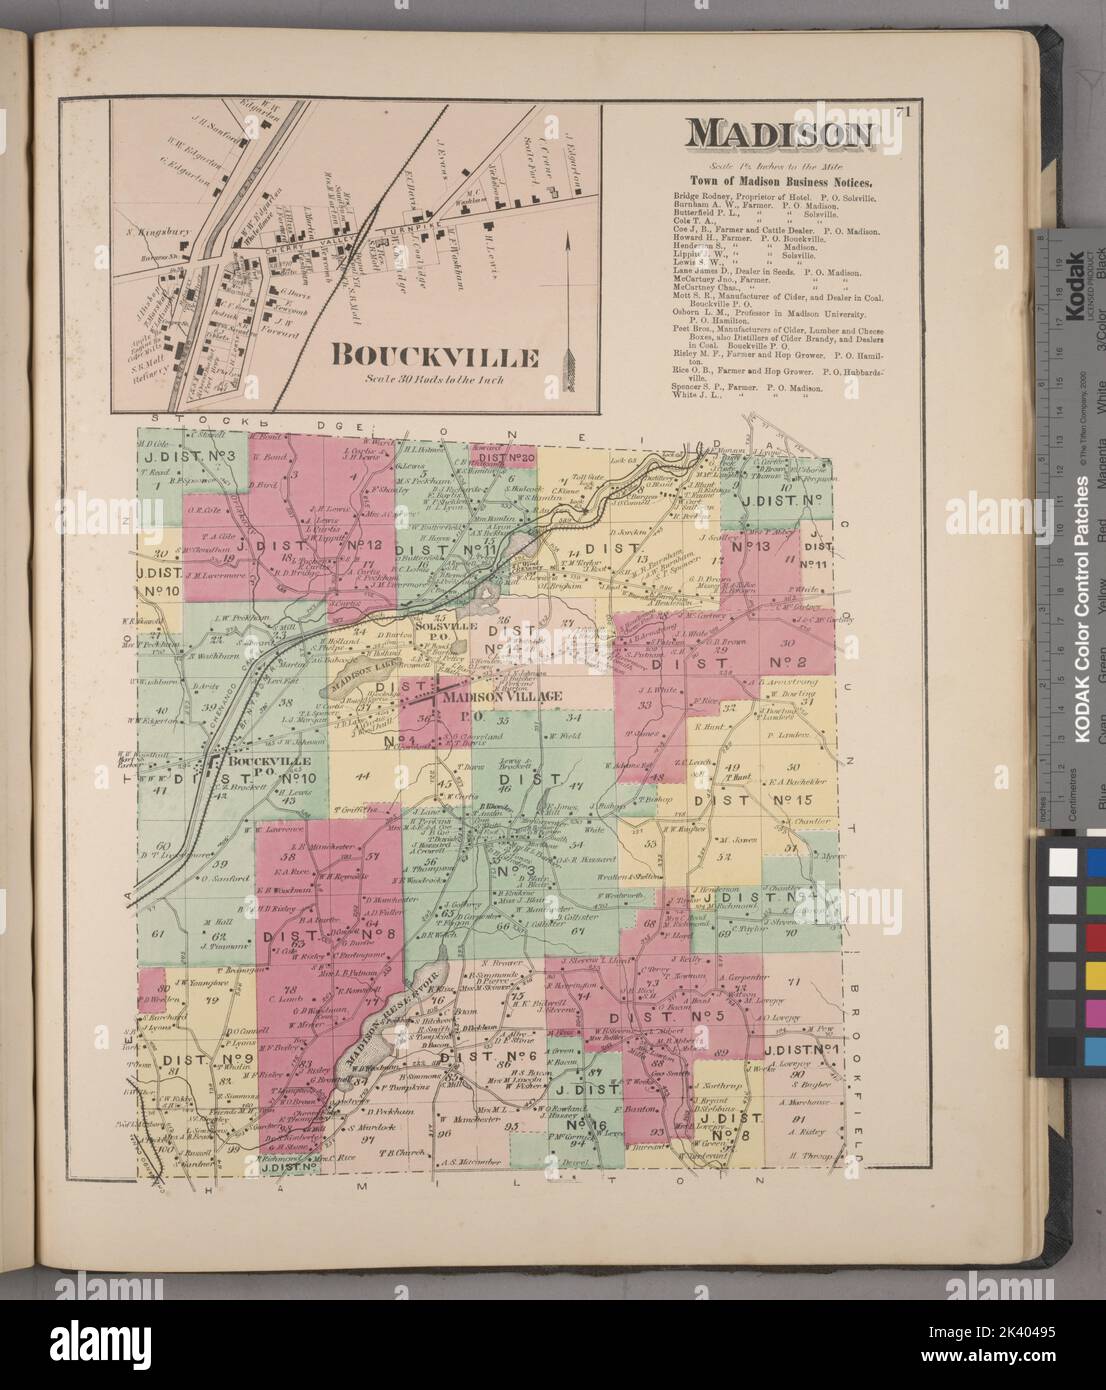 Bouckville Village; Madison Township; Town of Madison Business Notices Cartographic. Atlases, Maps. 1875. Lionel Pincus and Princess Firyal Map Division. Madison County (N.Y.), Real property , New York (State) , Madison County, Business enterprises , New York (State) , Madison County Stock Photo